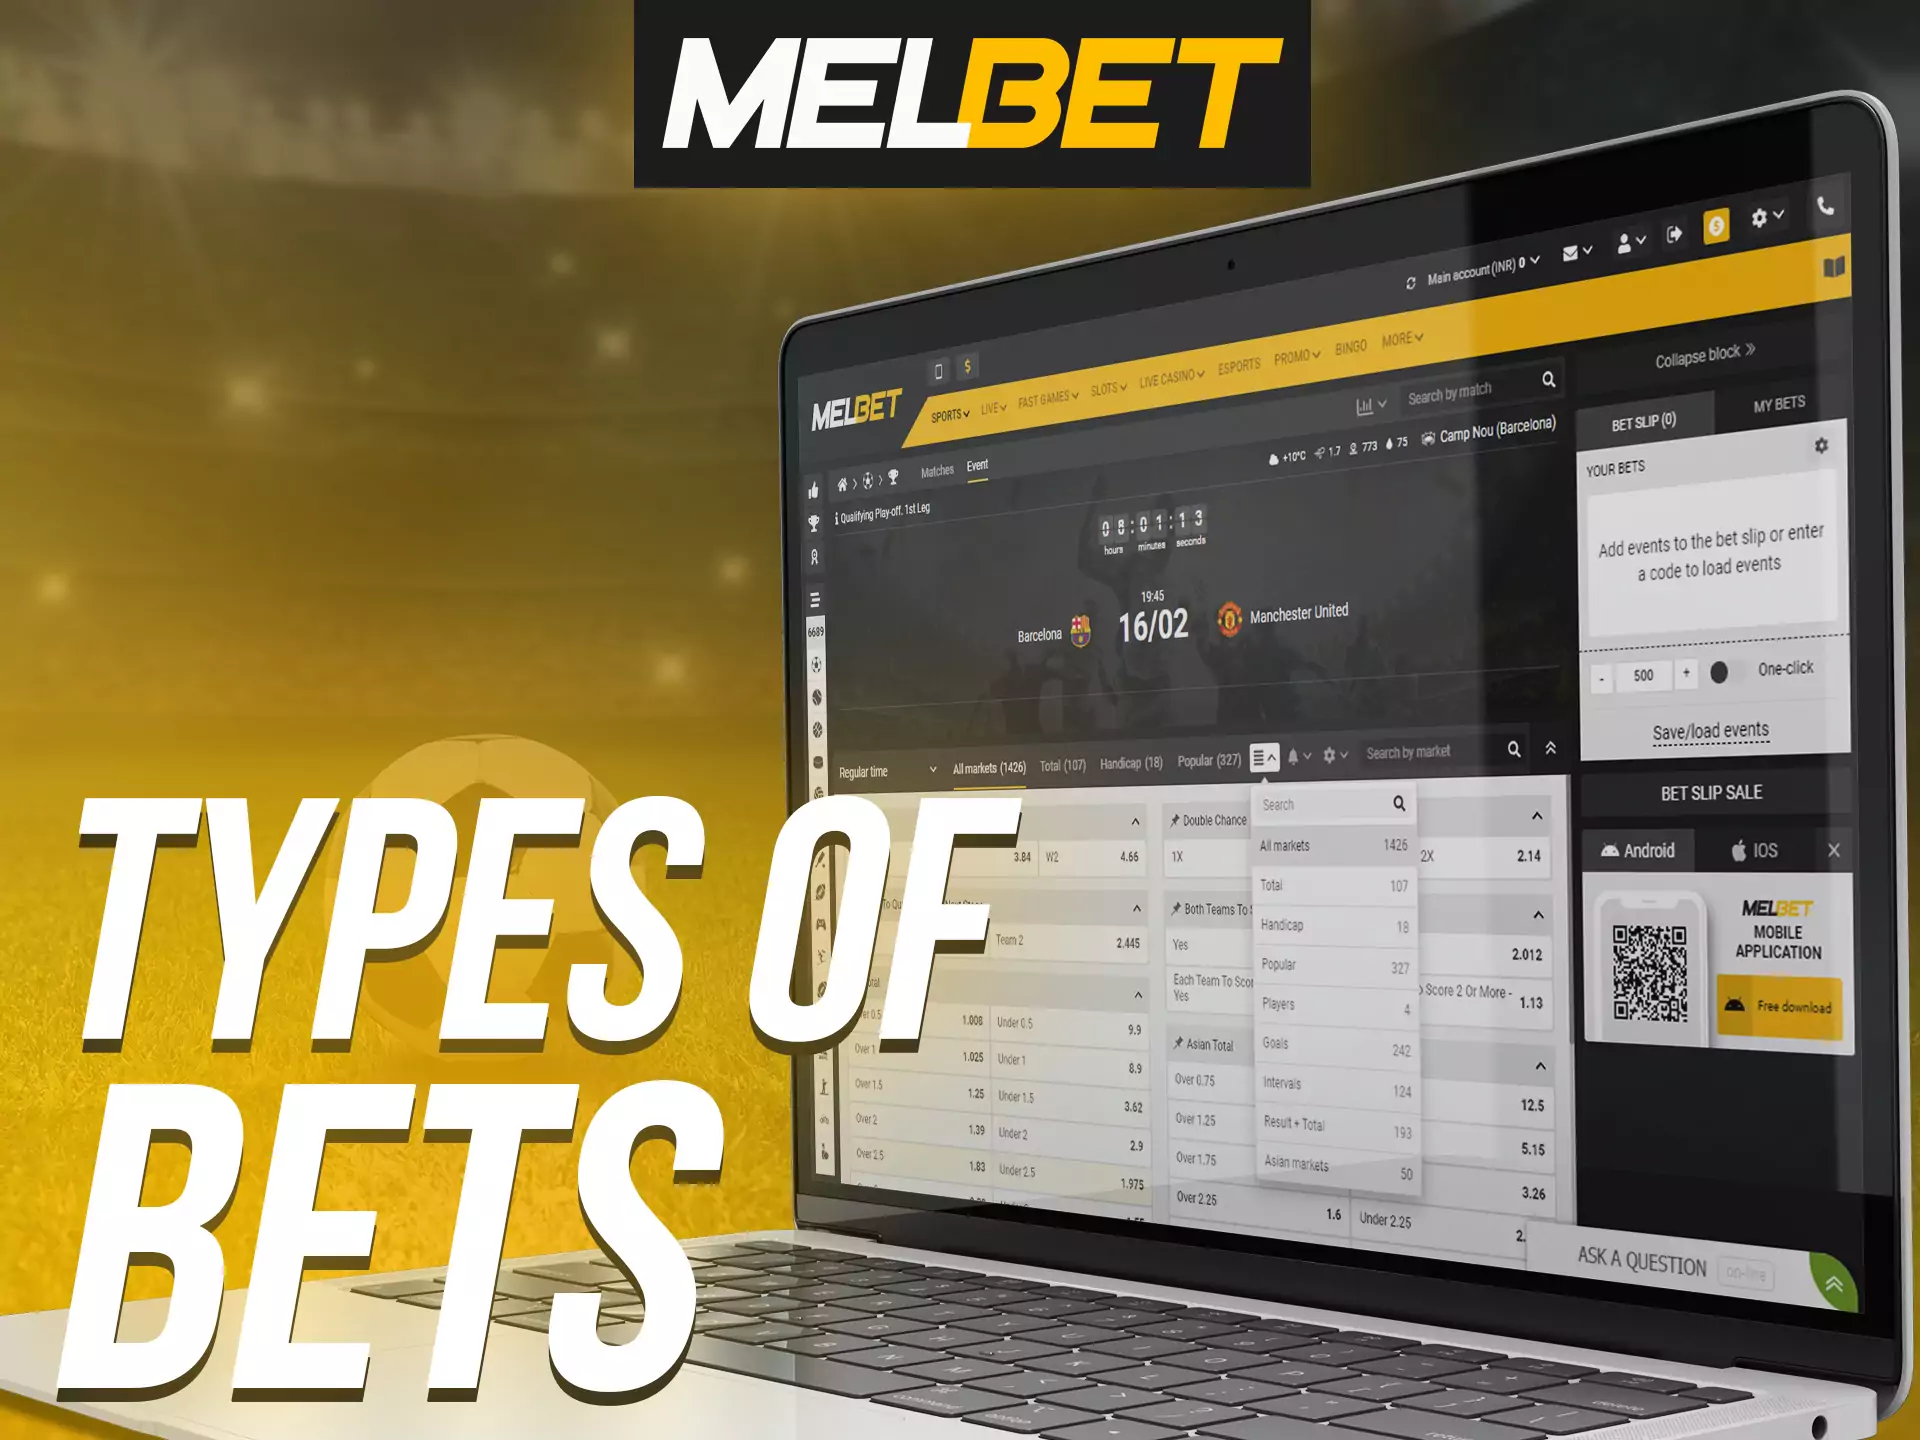 Place different bets on Melbet.